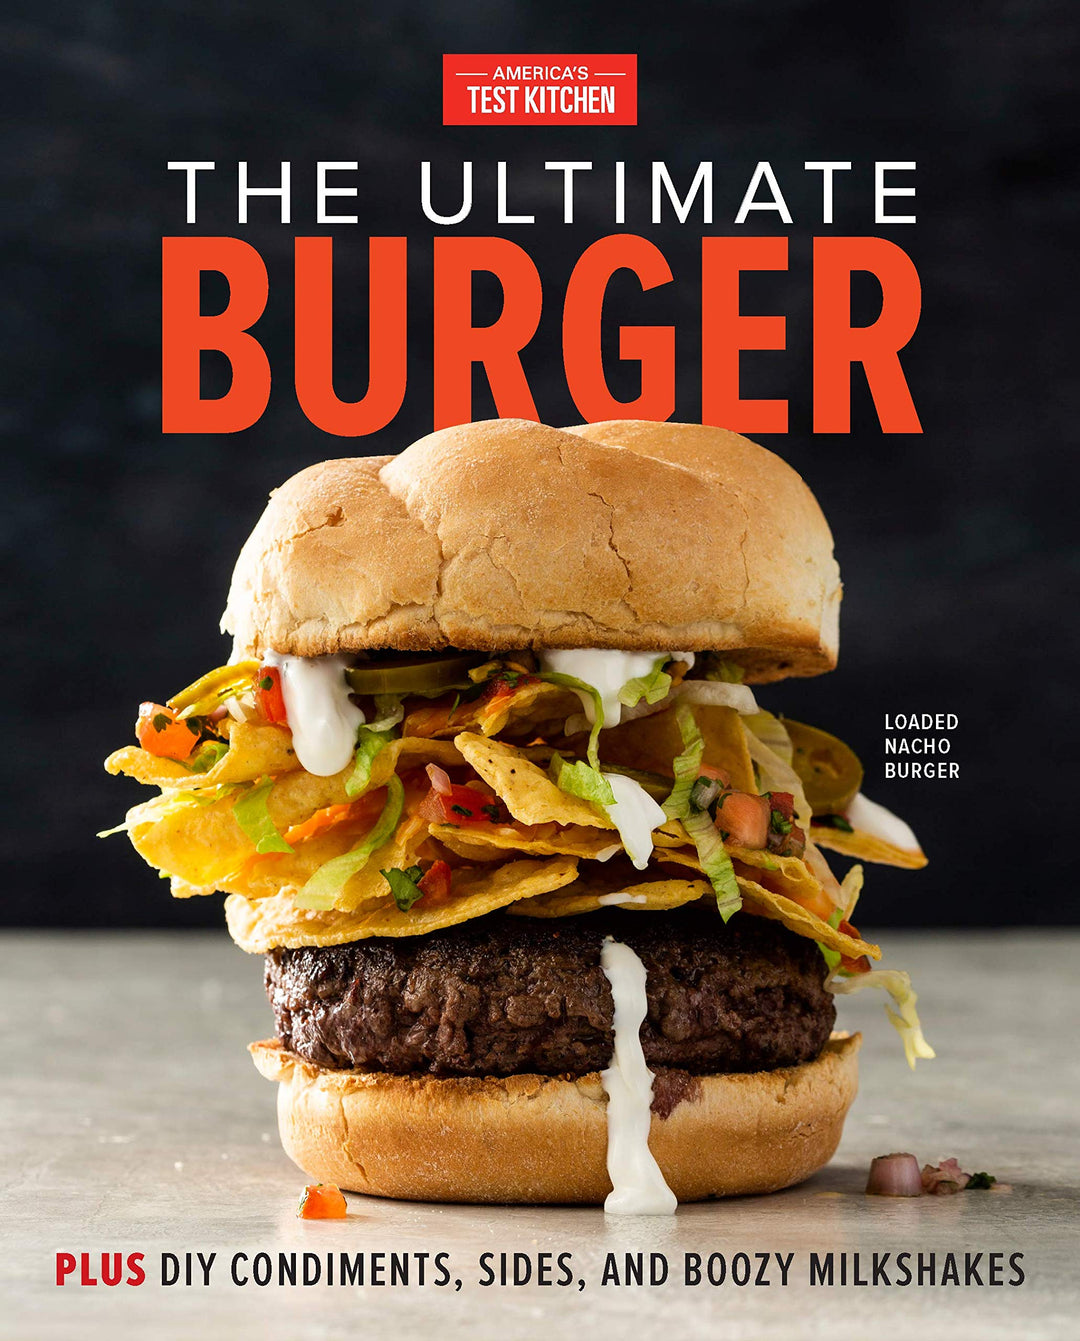 The Ultimate Burger: Plus DIY Condiments, Sides, and Boozy Milkshakes